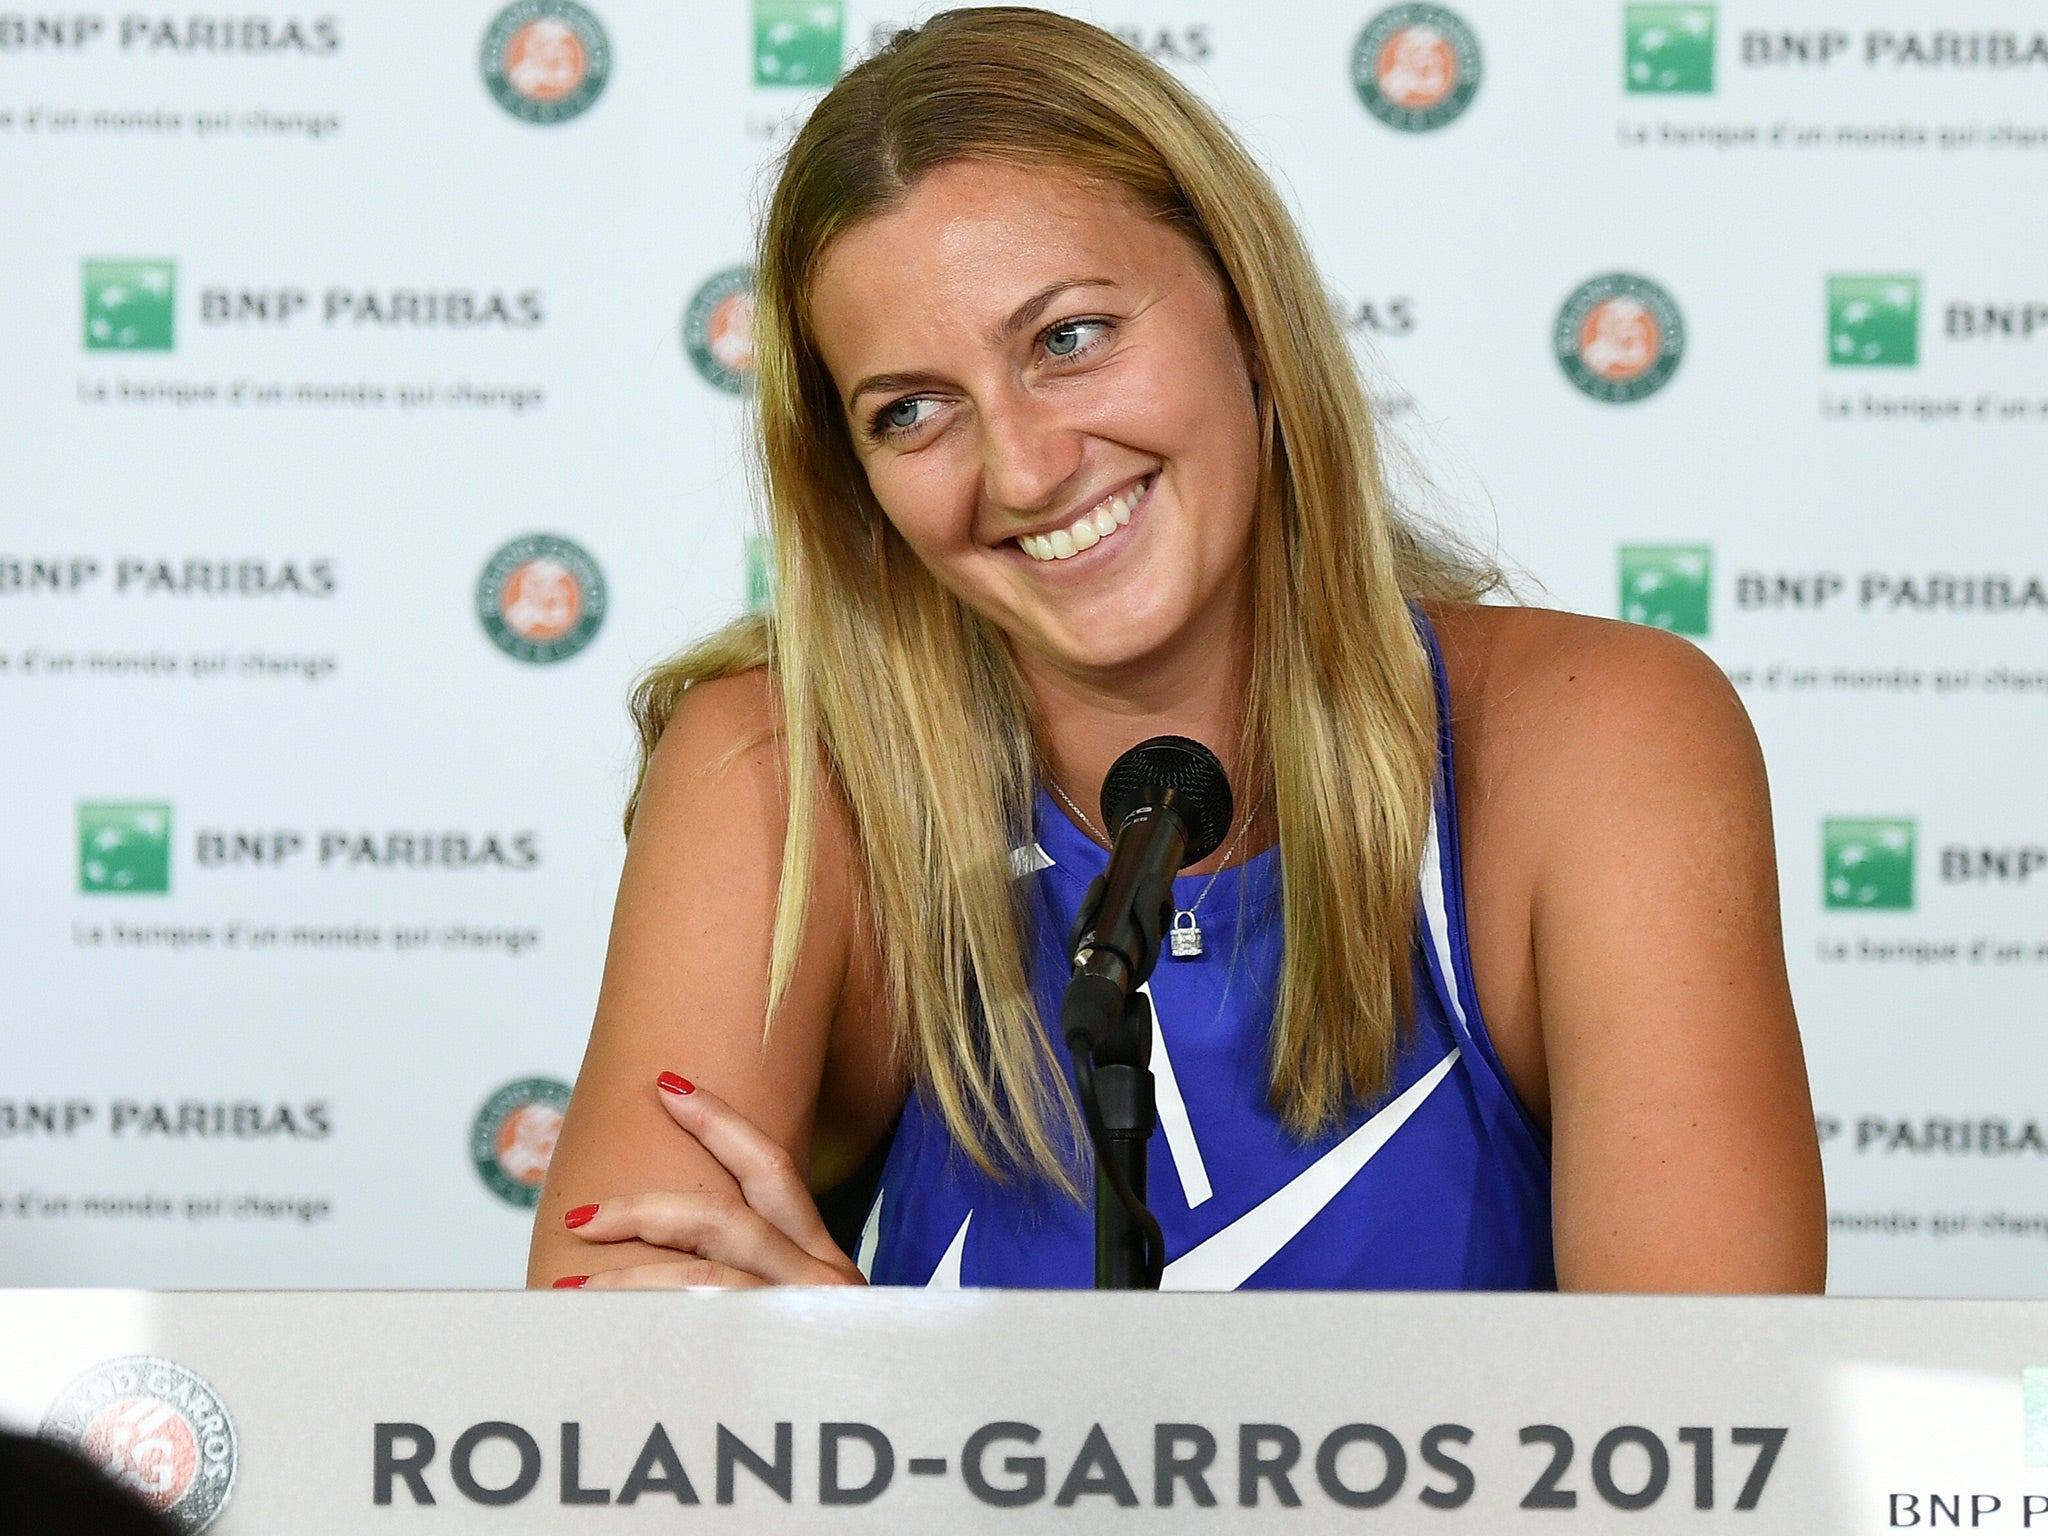 Petra Kvitova is happy to simply being able to walk out on court again